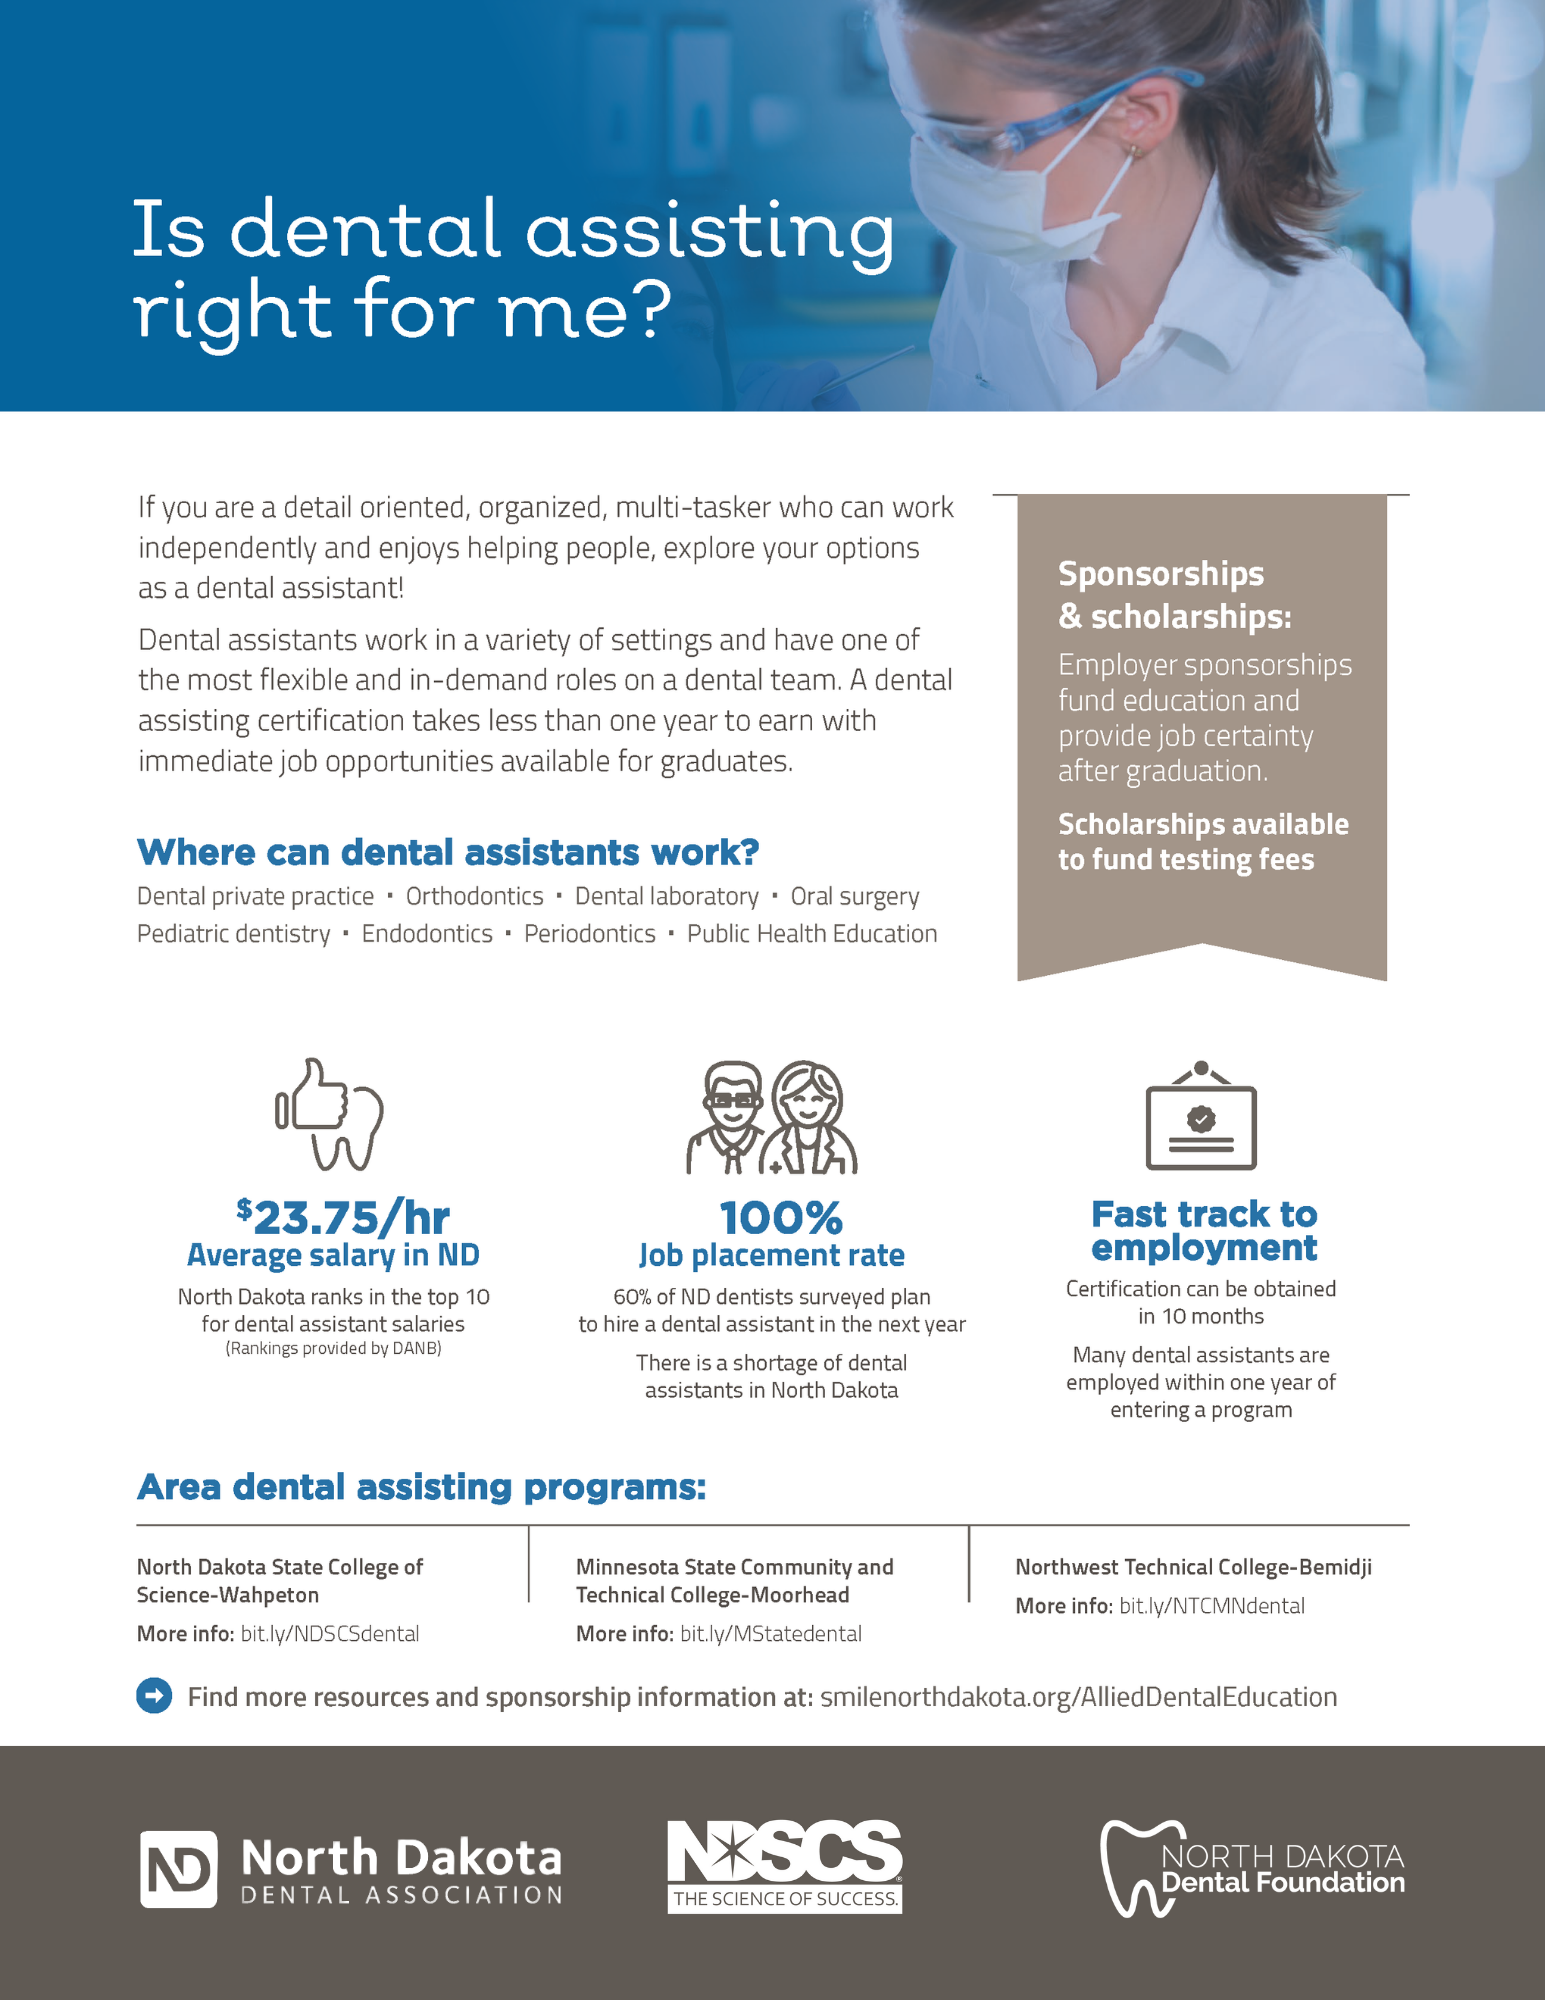 Your path to dental assistant registration - FLYER